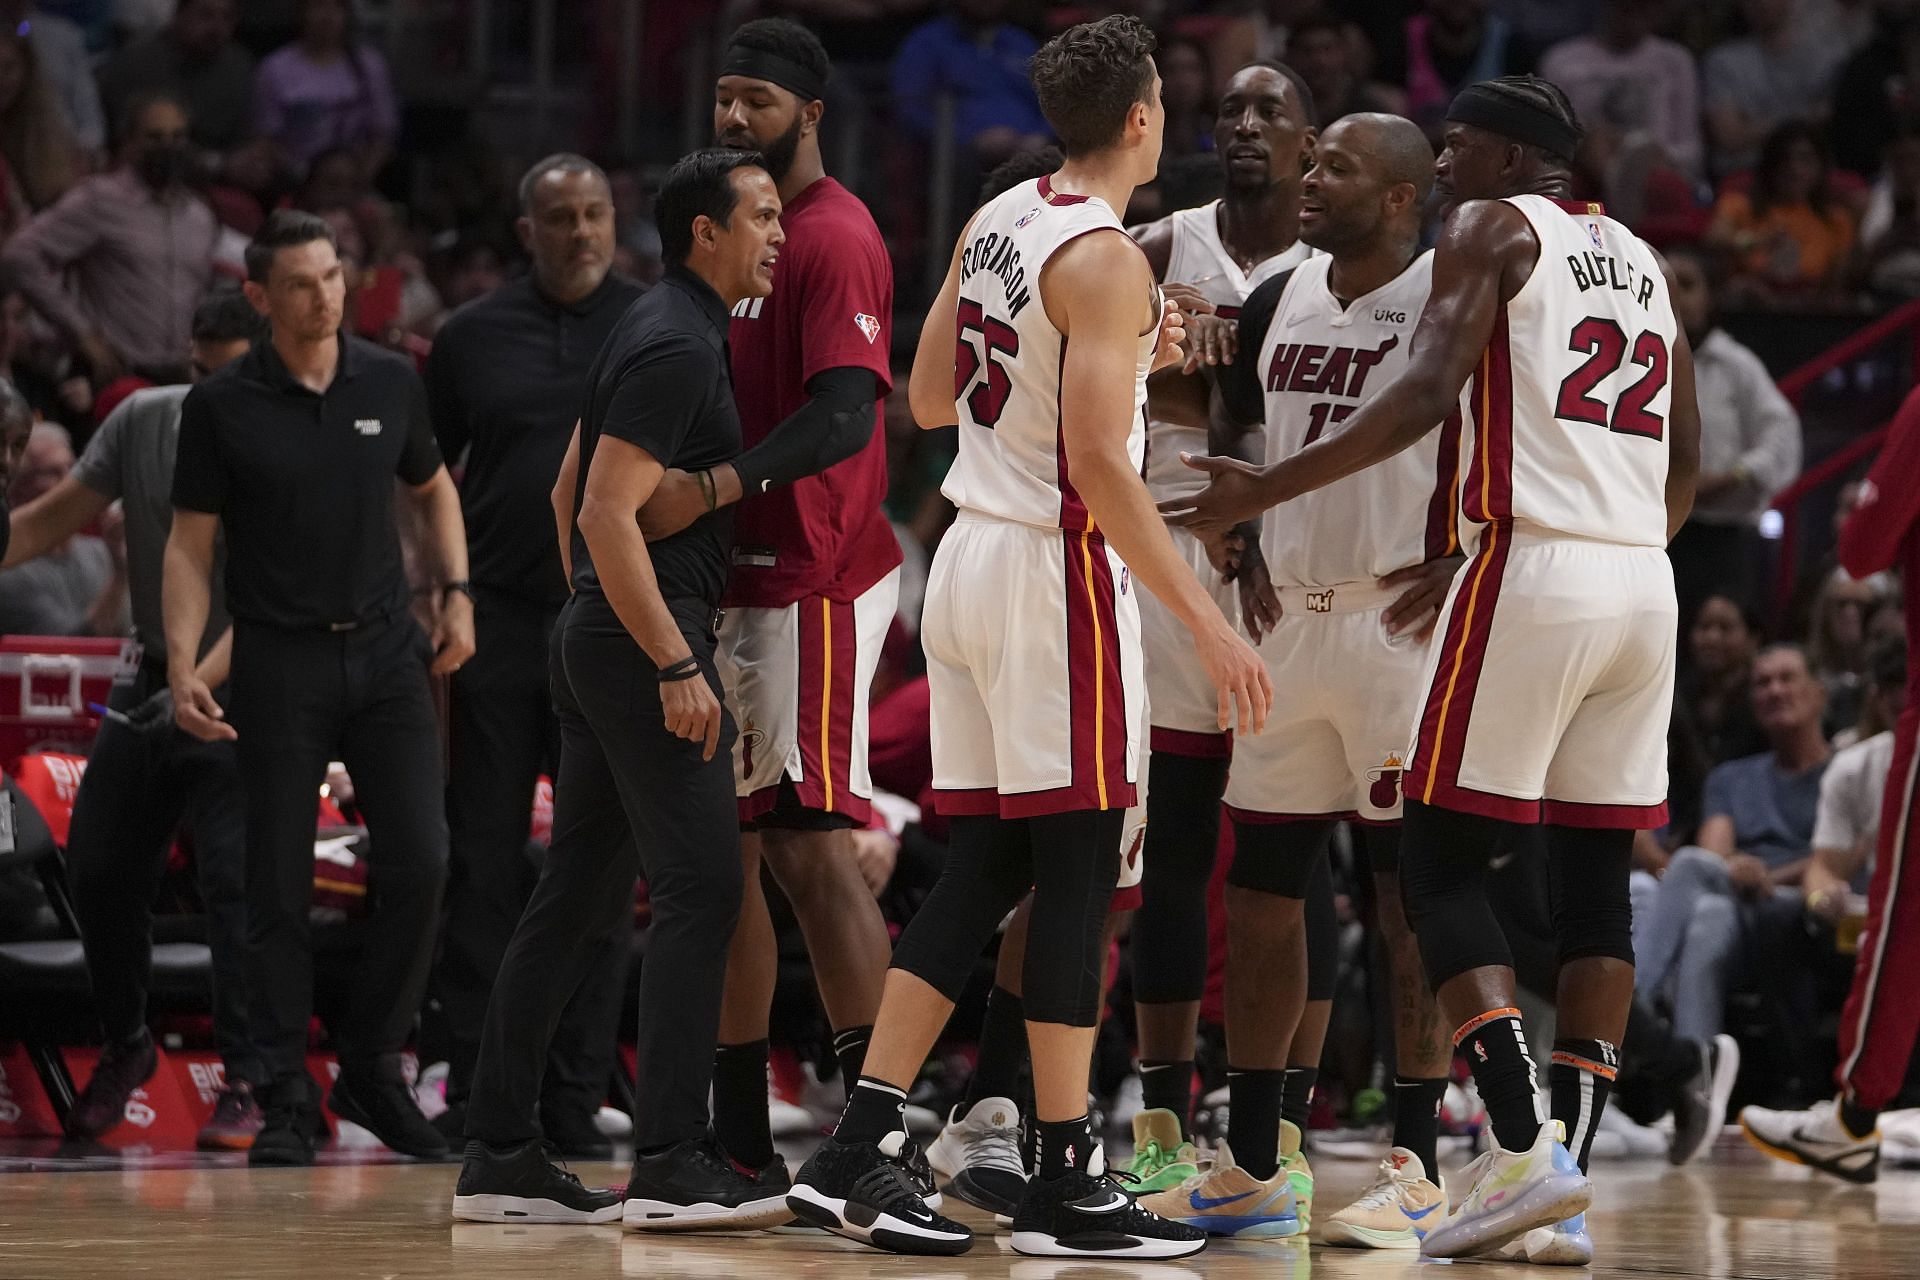 Miami Heat bench embroiled in a little scuffle